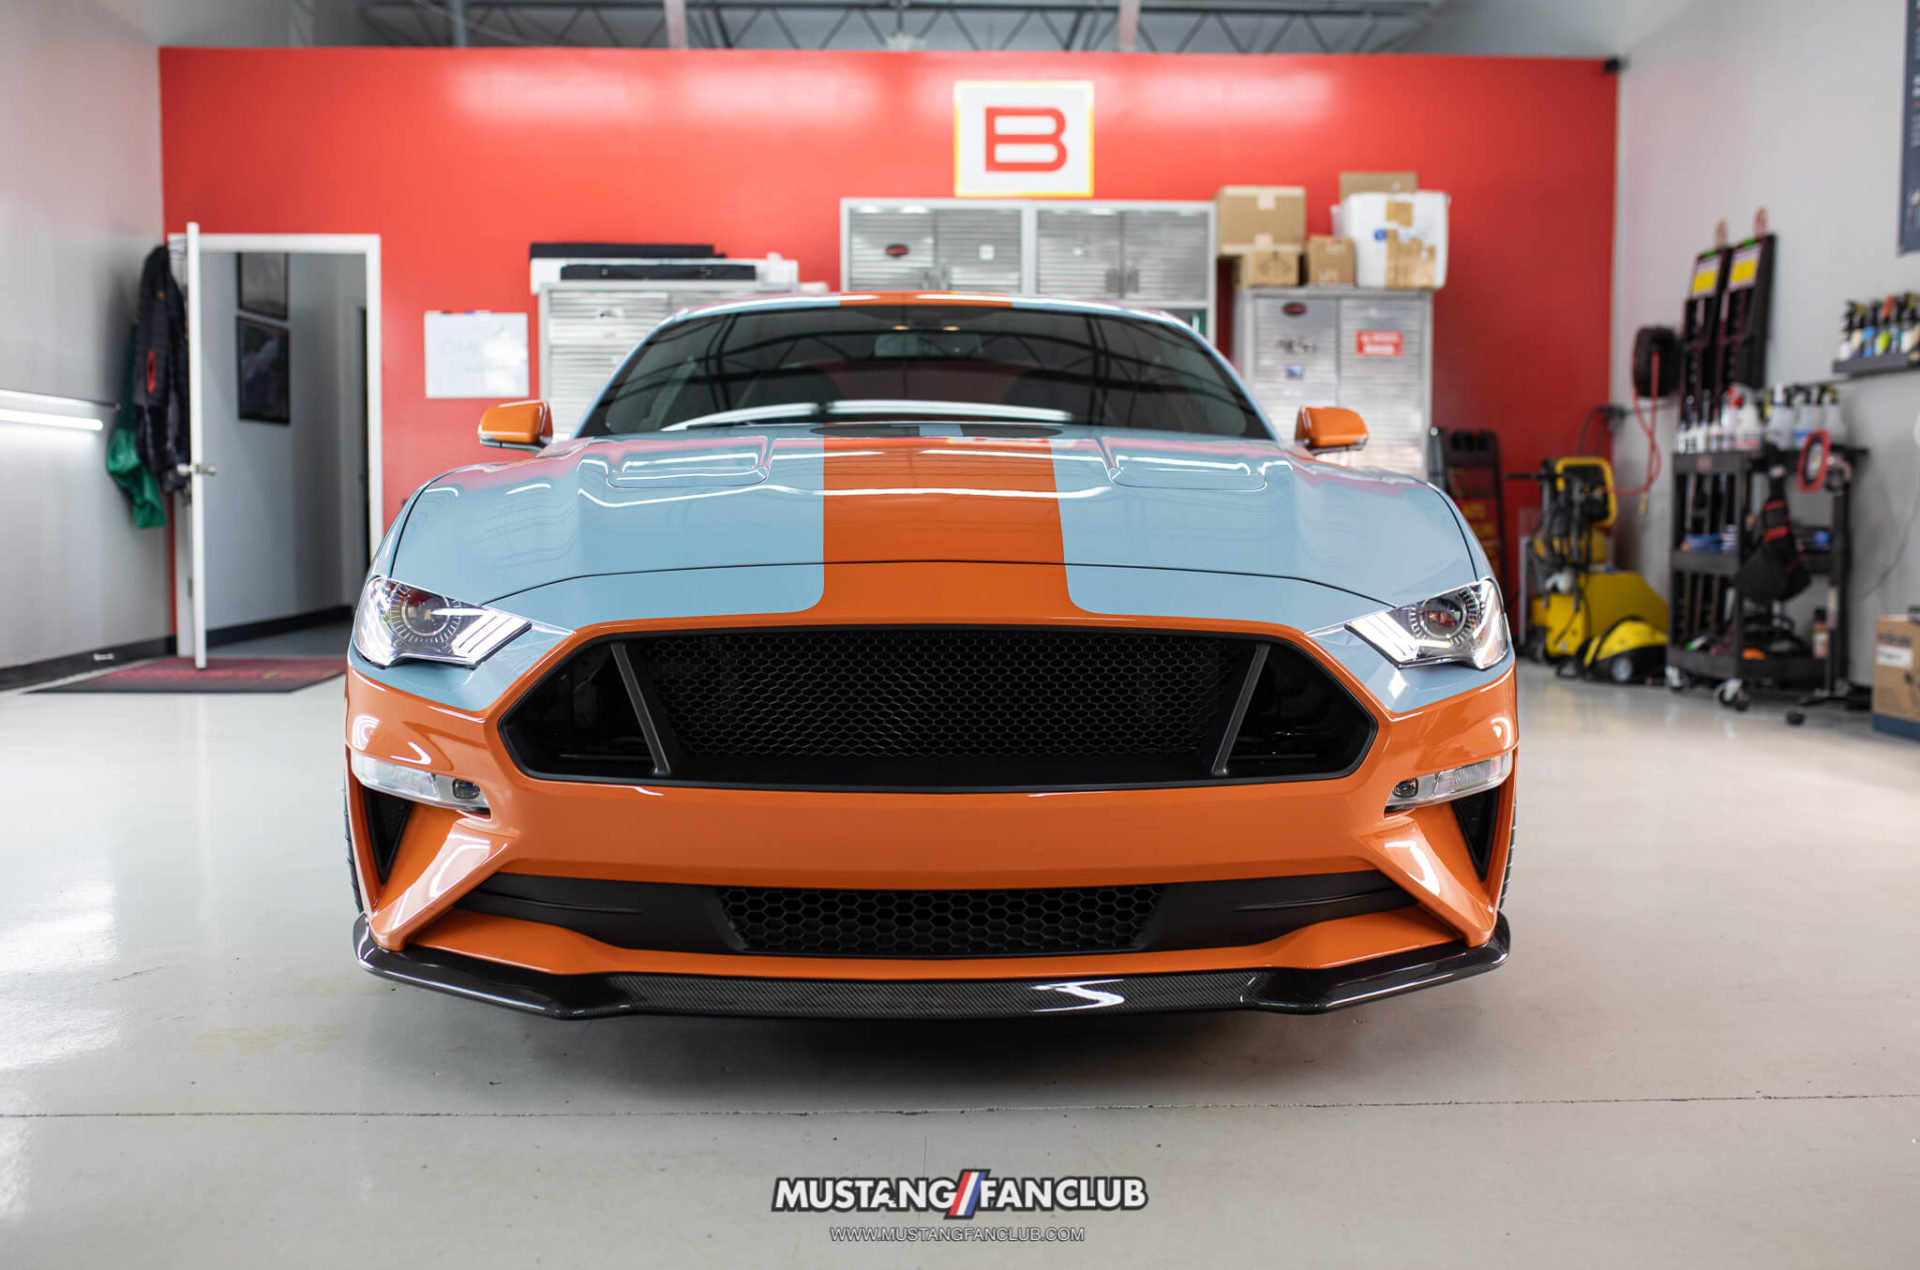 1 of 3 - Gulf Heritage Edition Mustang GT - Mustang Fan Club